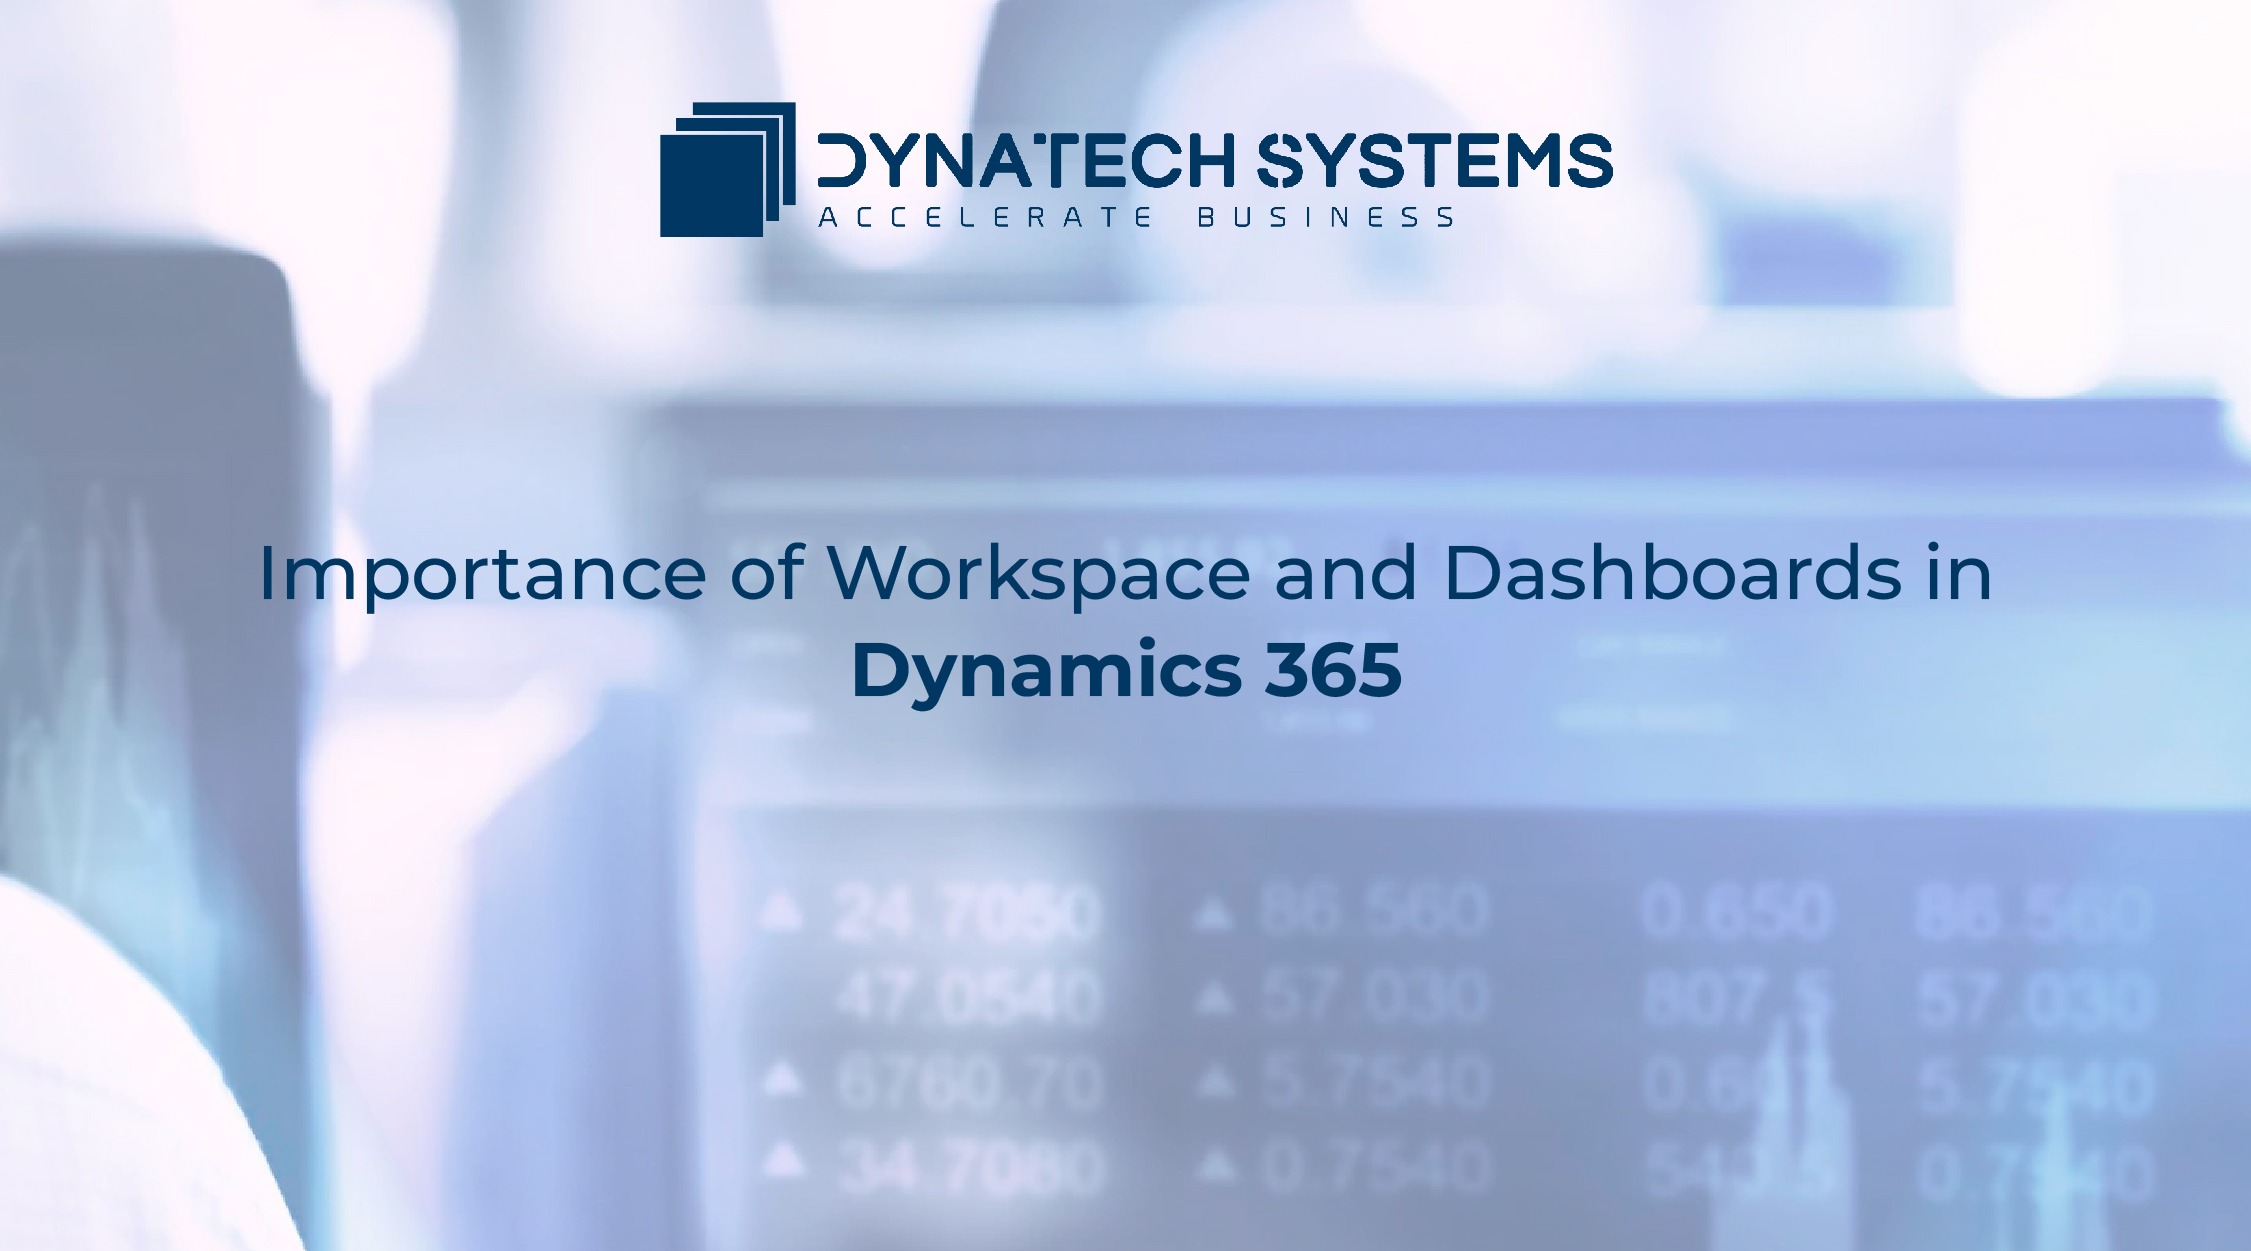 Importance of Workspace and Dashboards in Dynamics 365